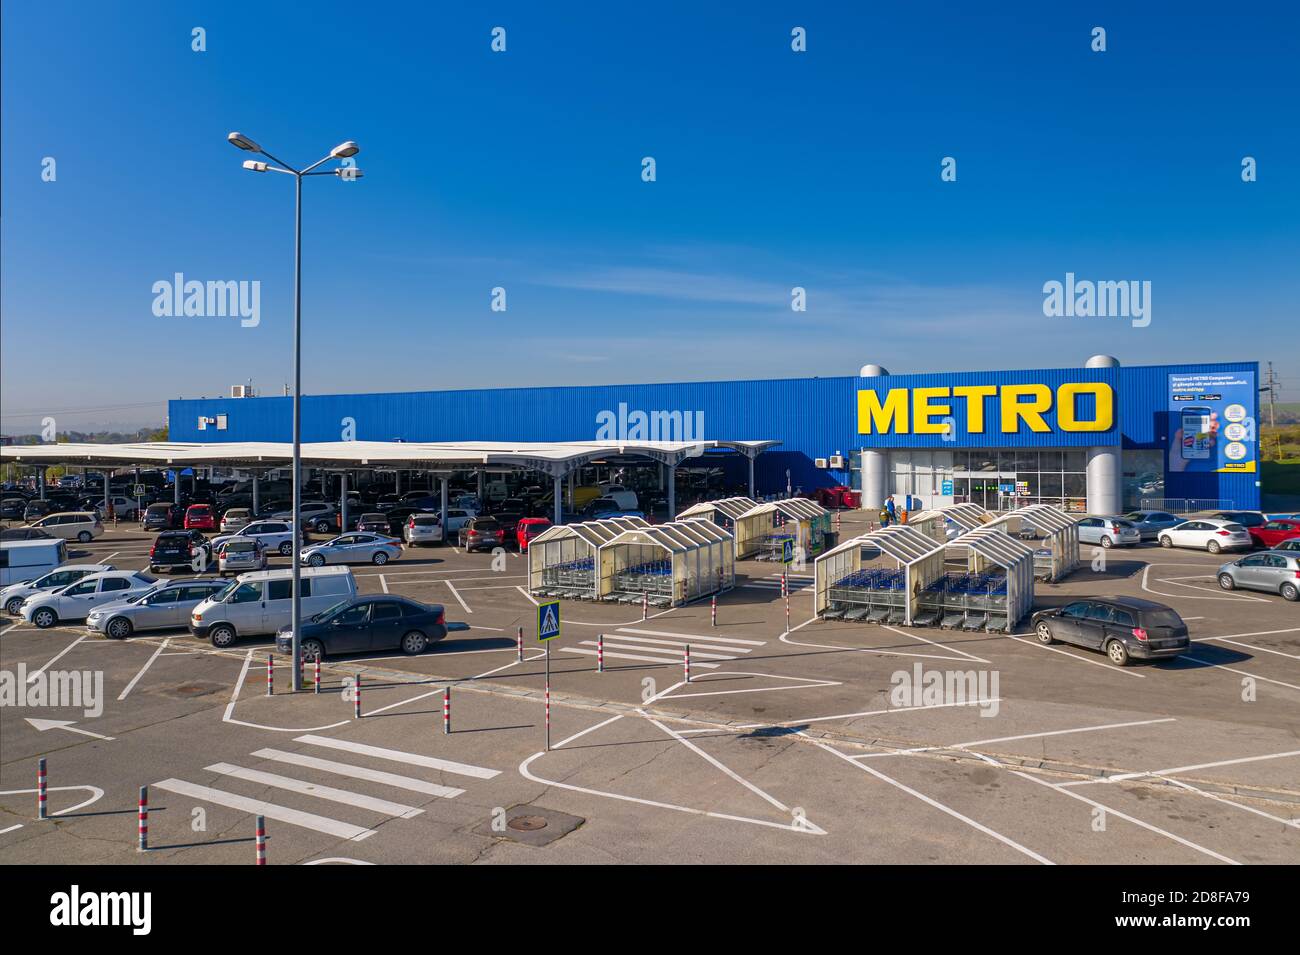 Metro retail store, large shopping mall of household and food goods with parking, aerial view, copyspace Stock Photo